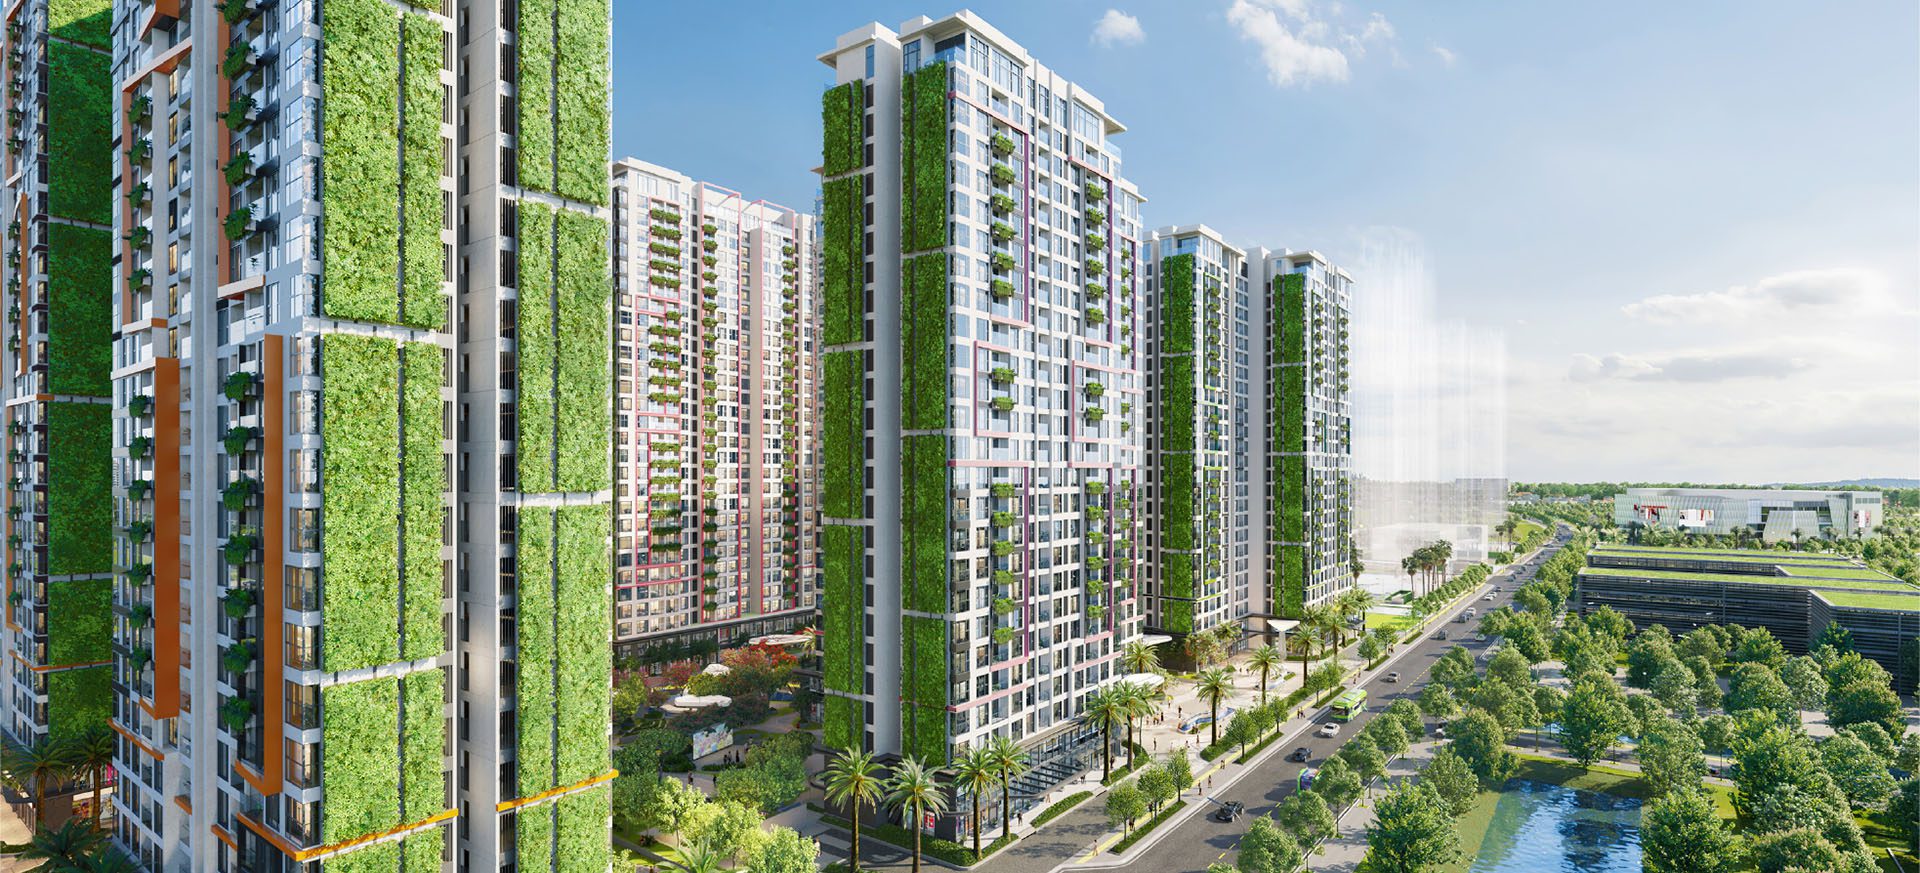 Lumière Boulevard – Foreigner’s most ideal choice for long-term residence in HCMC